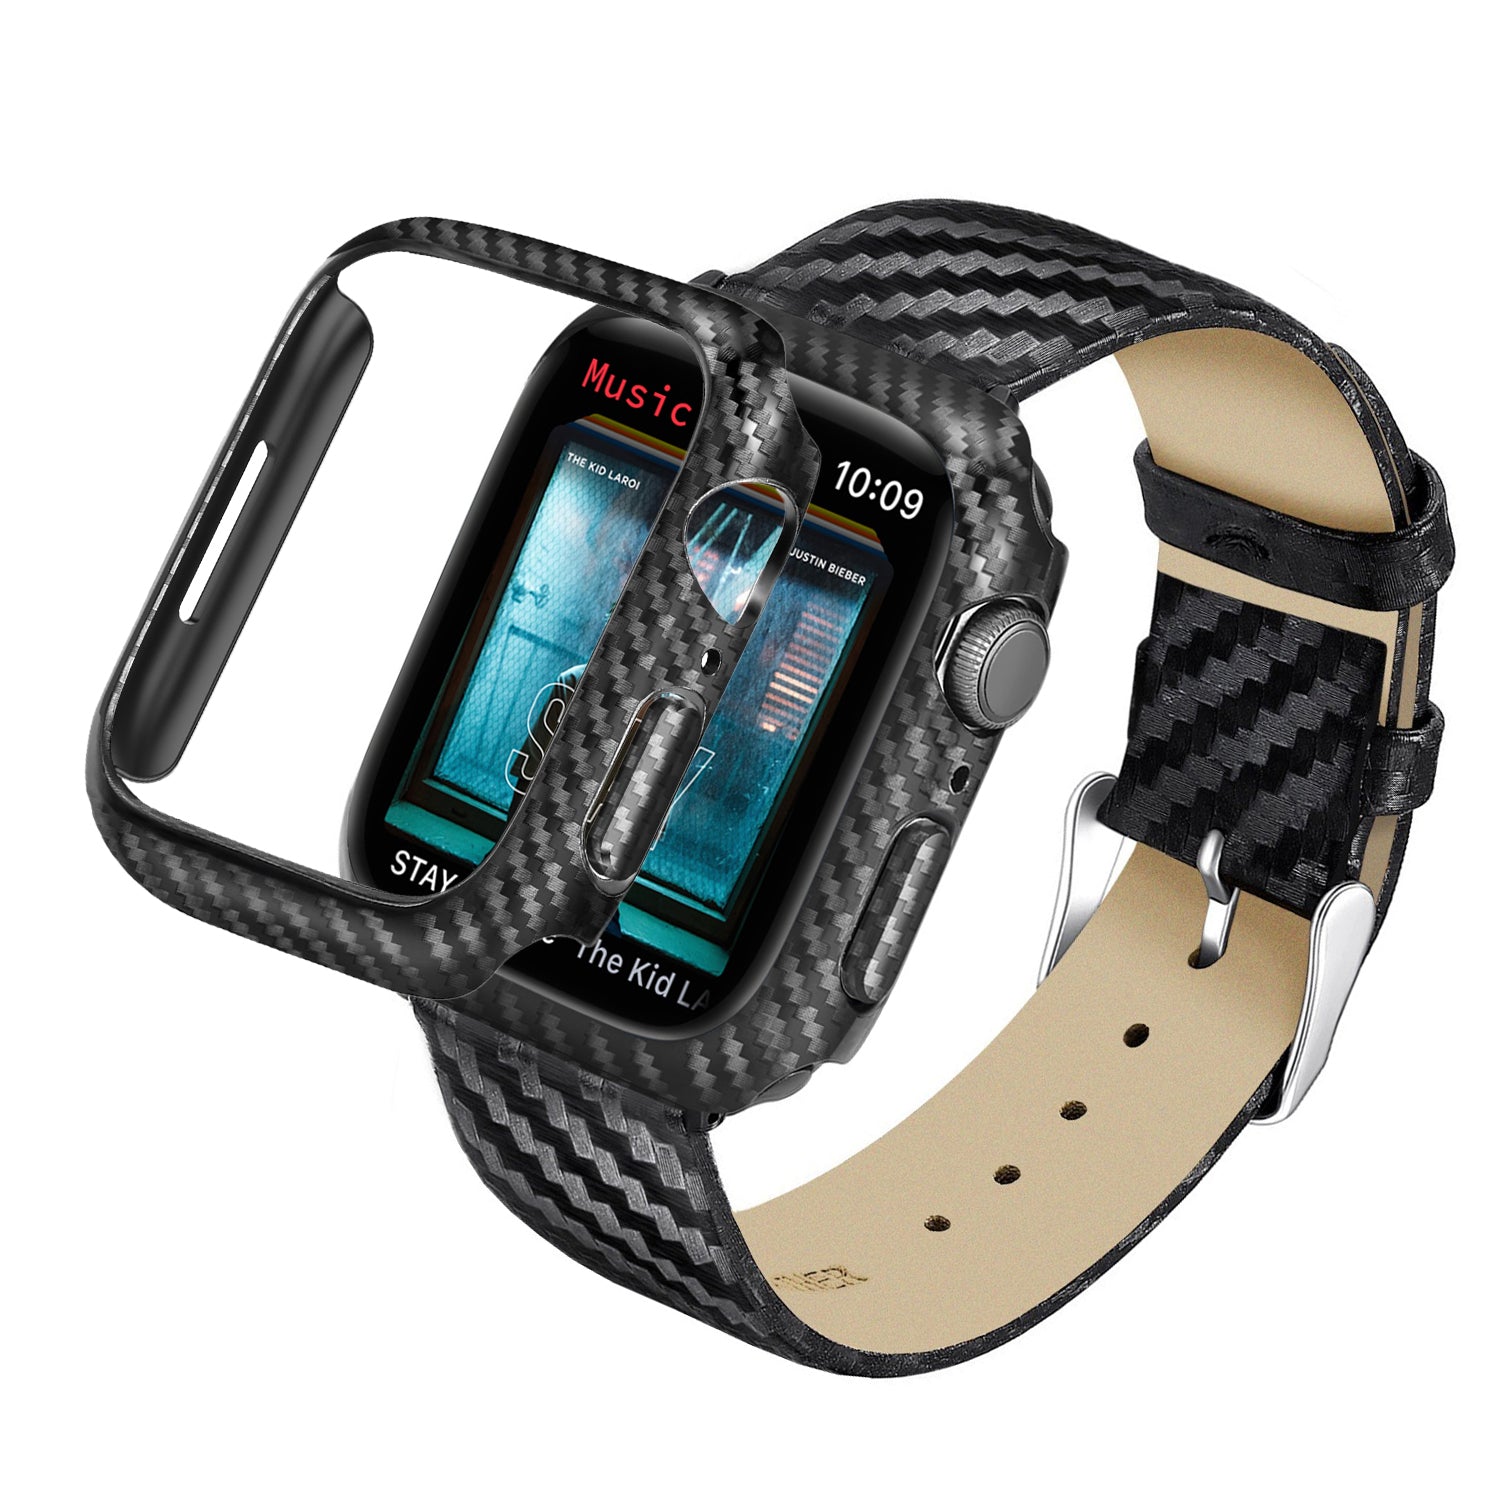 Carbon Fiber Smart Watch PC Protective Case Genuine Leather Wrist Band Replacement for Apple Watch Series 1/2/3 38mm